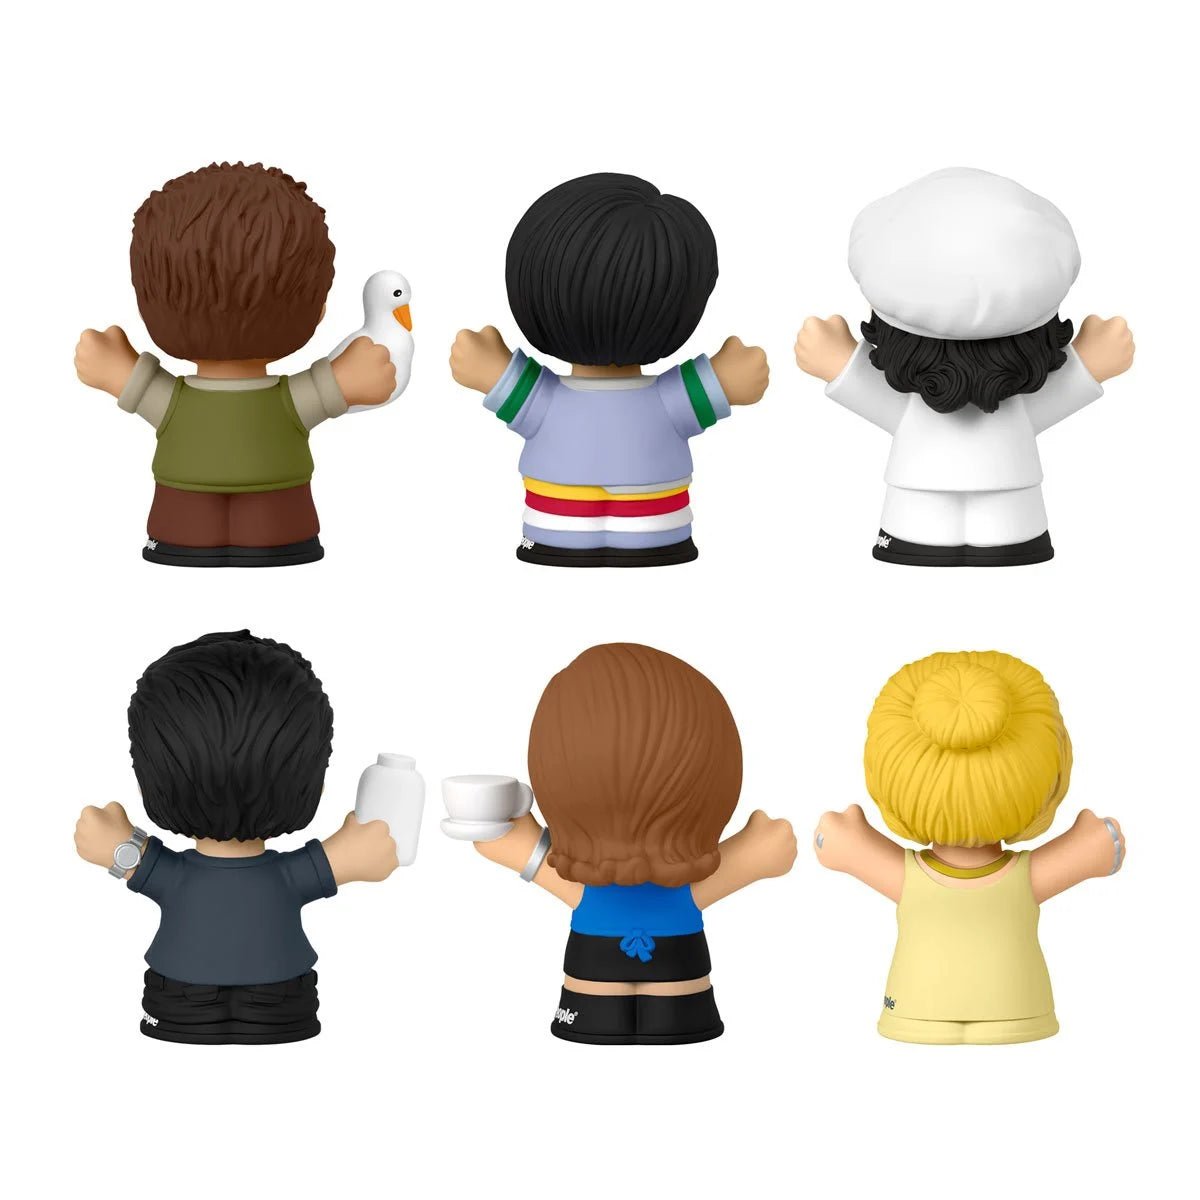 Friends The Television Series Little People Collector Figure Set - Simon's Collectibles